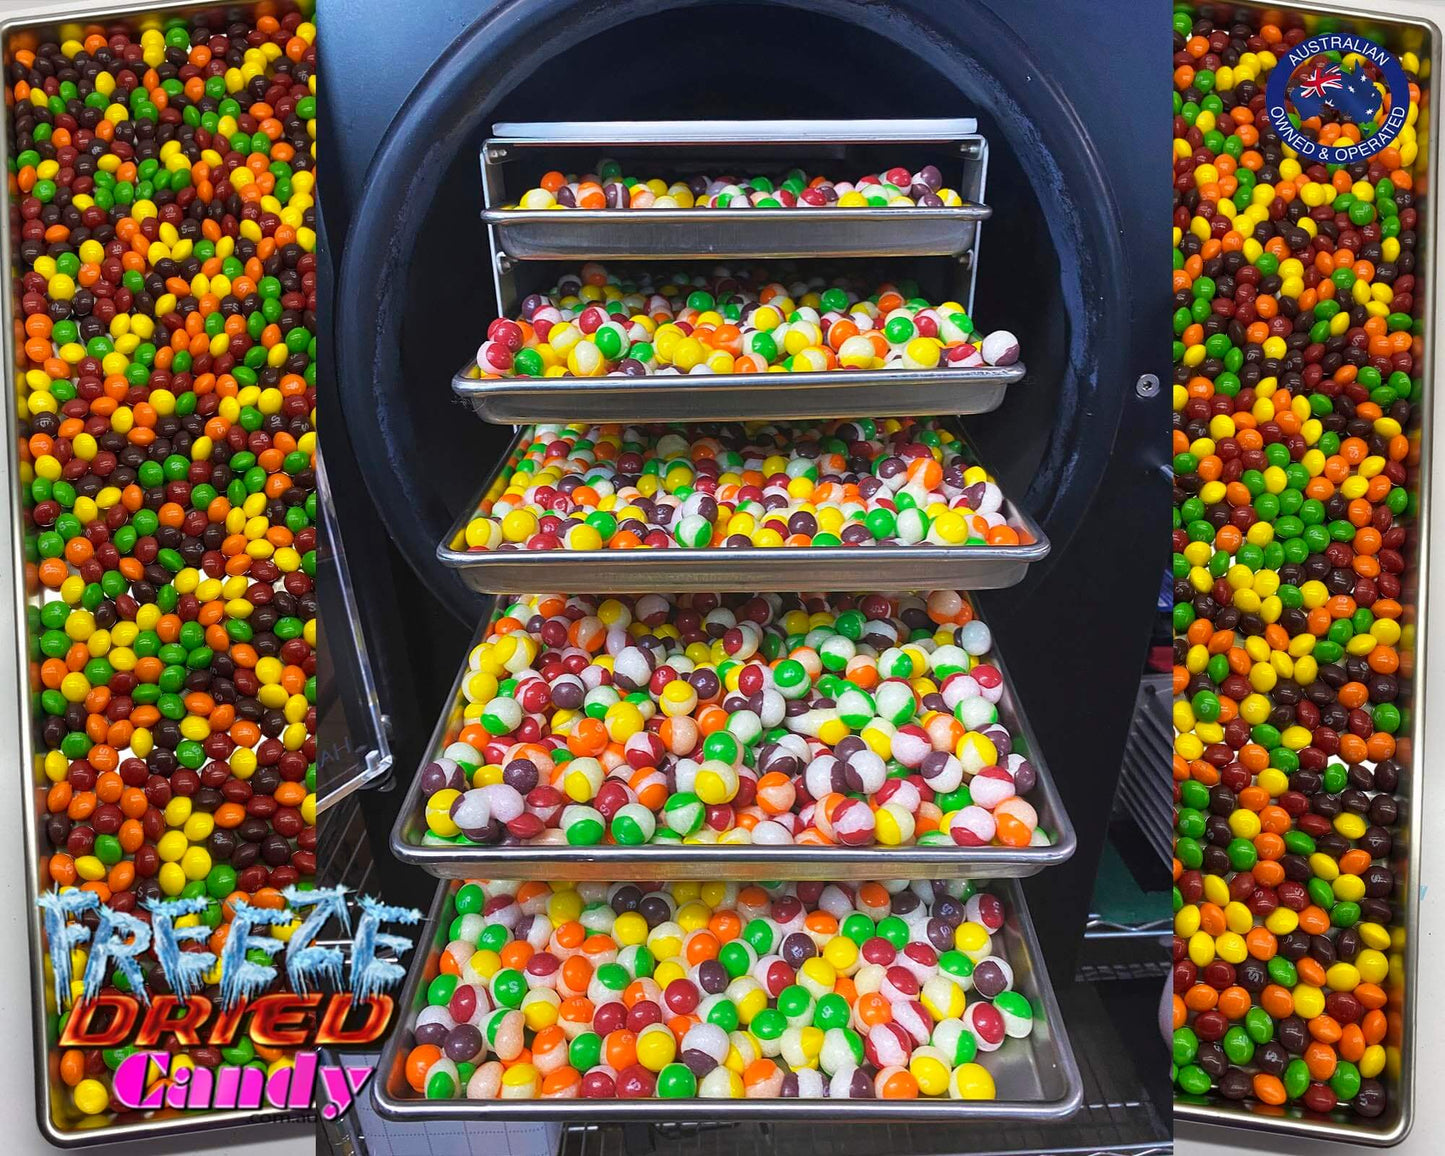 Freeze Dried Skittles - Original - Freeze Dried Candy Why chew when you can crunch. These Freeze-Dried Skittles are highly addicting. The flavor really pops.  Now you can Crunch the Rainbow!